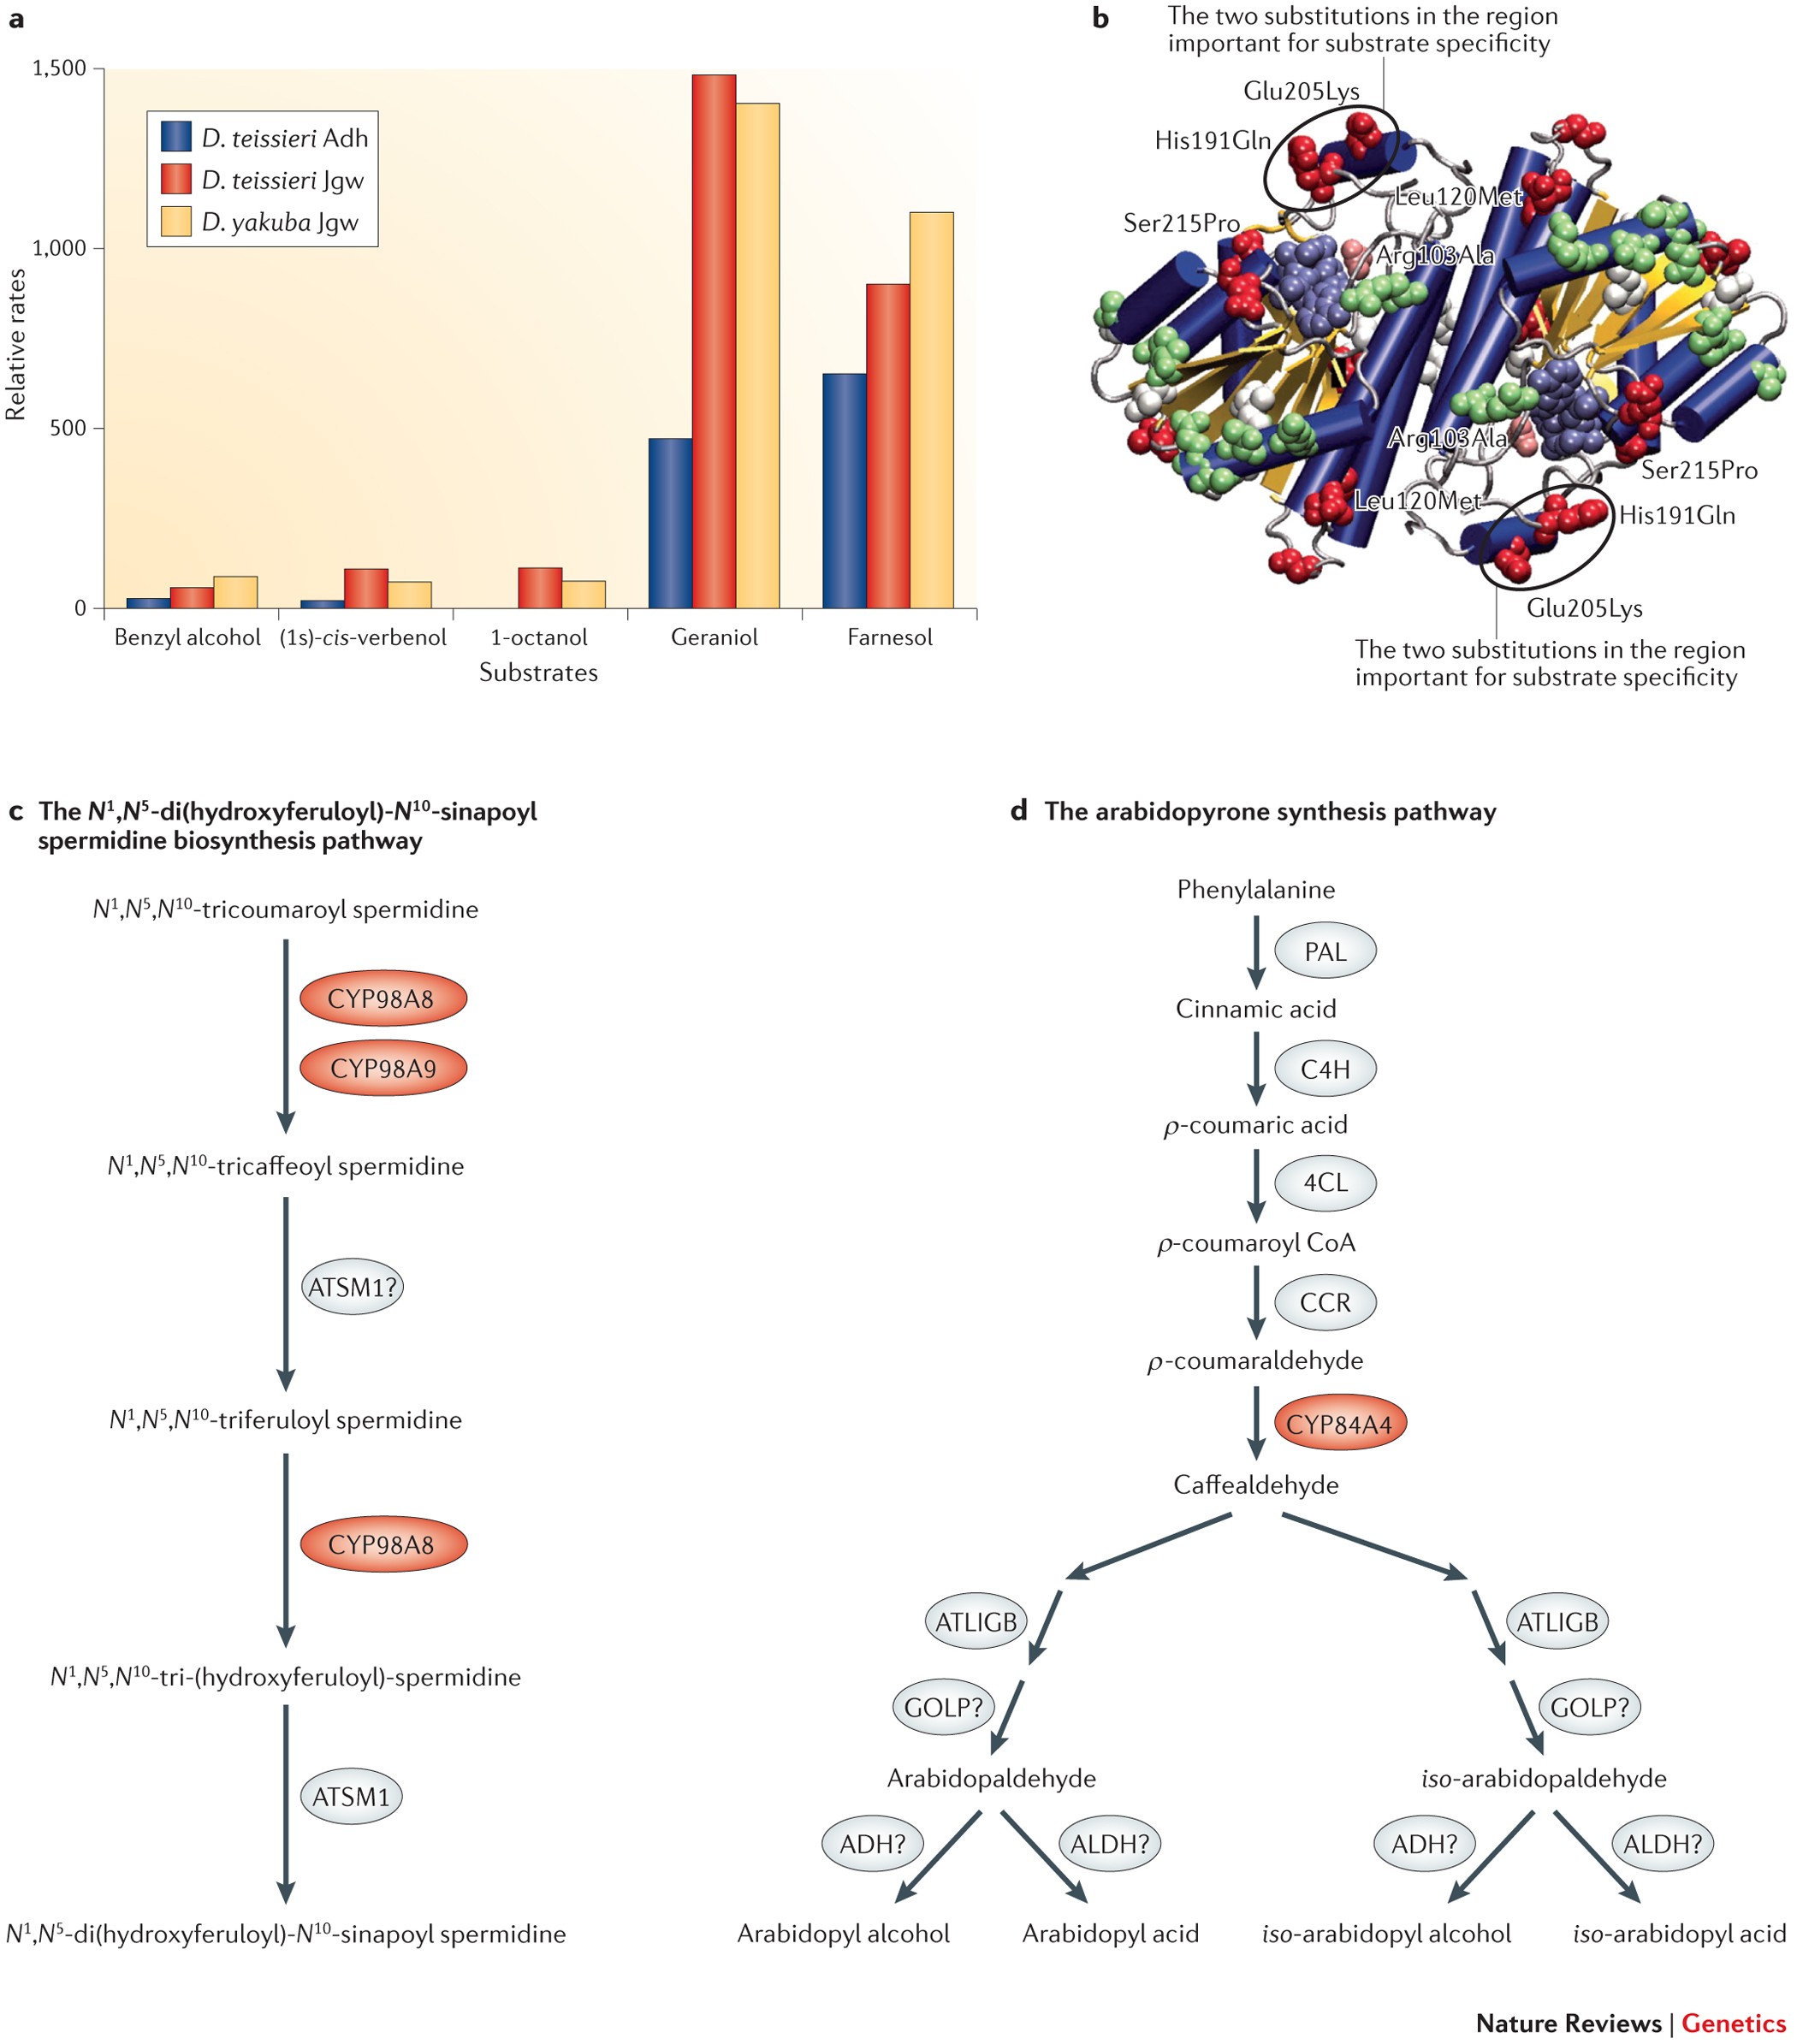 New genes as drivers of phenotypic evolution | Nature Reviews Genetics